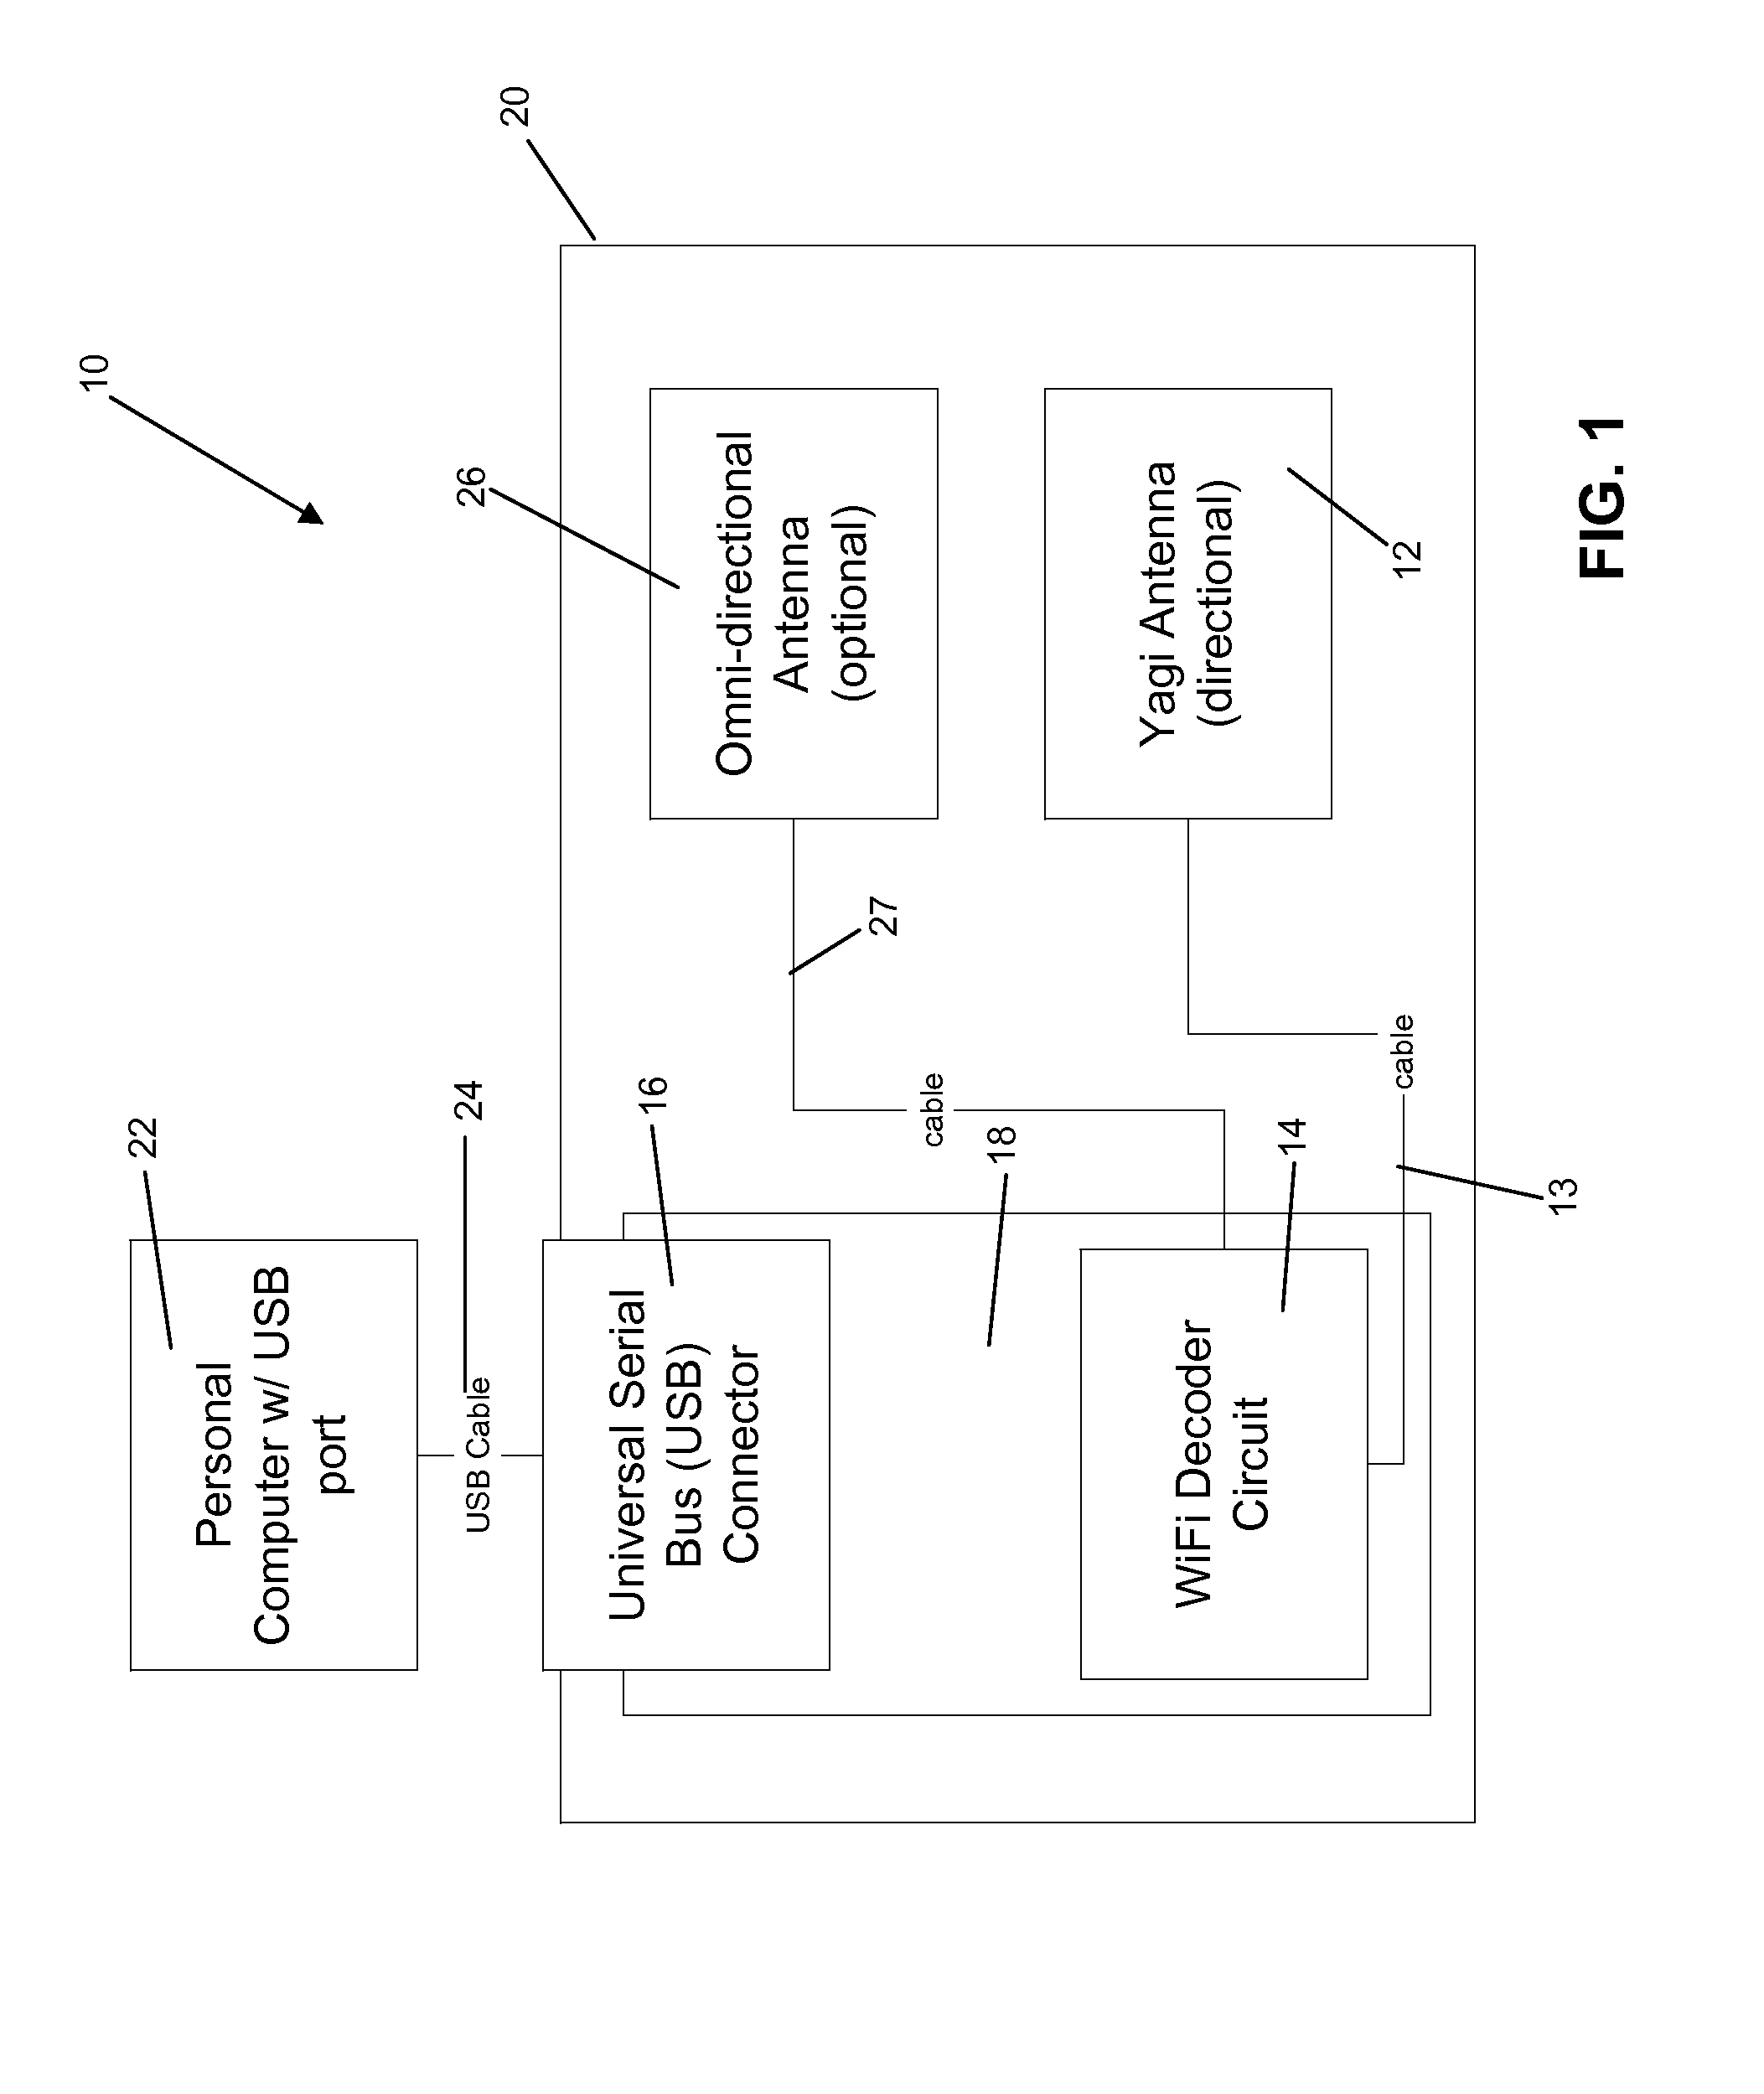 Wireless networking adapter and variable beam width antenna